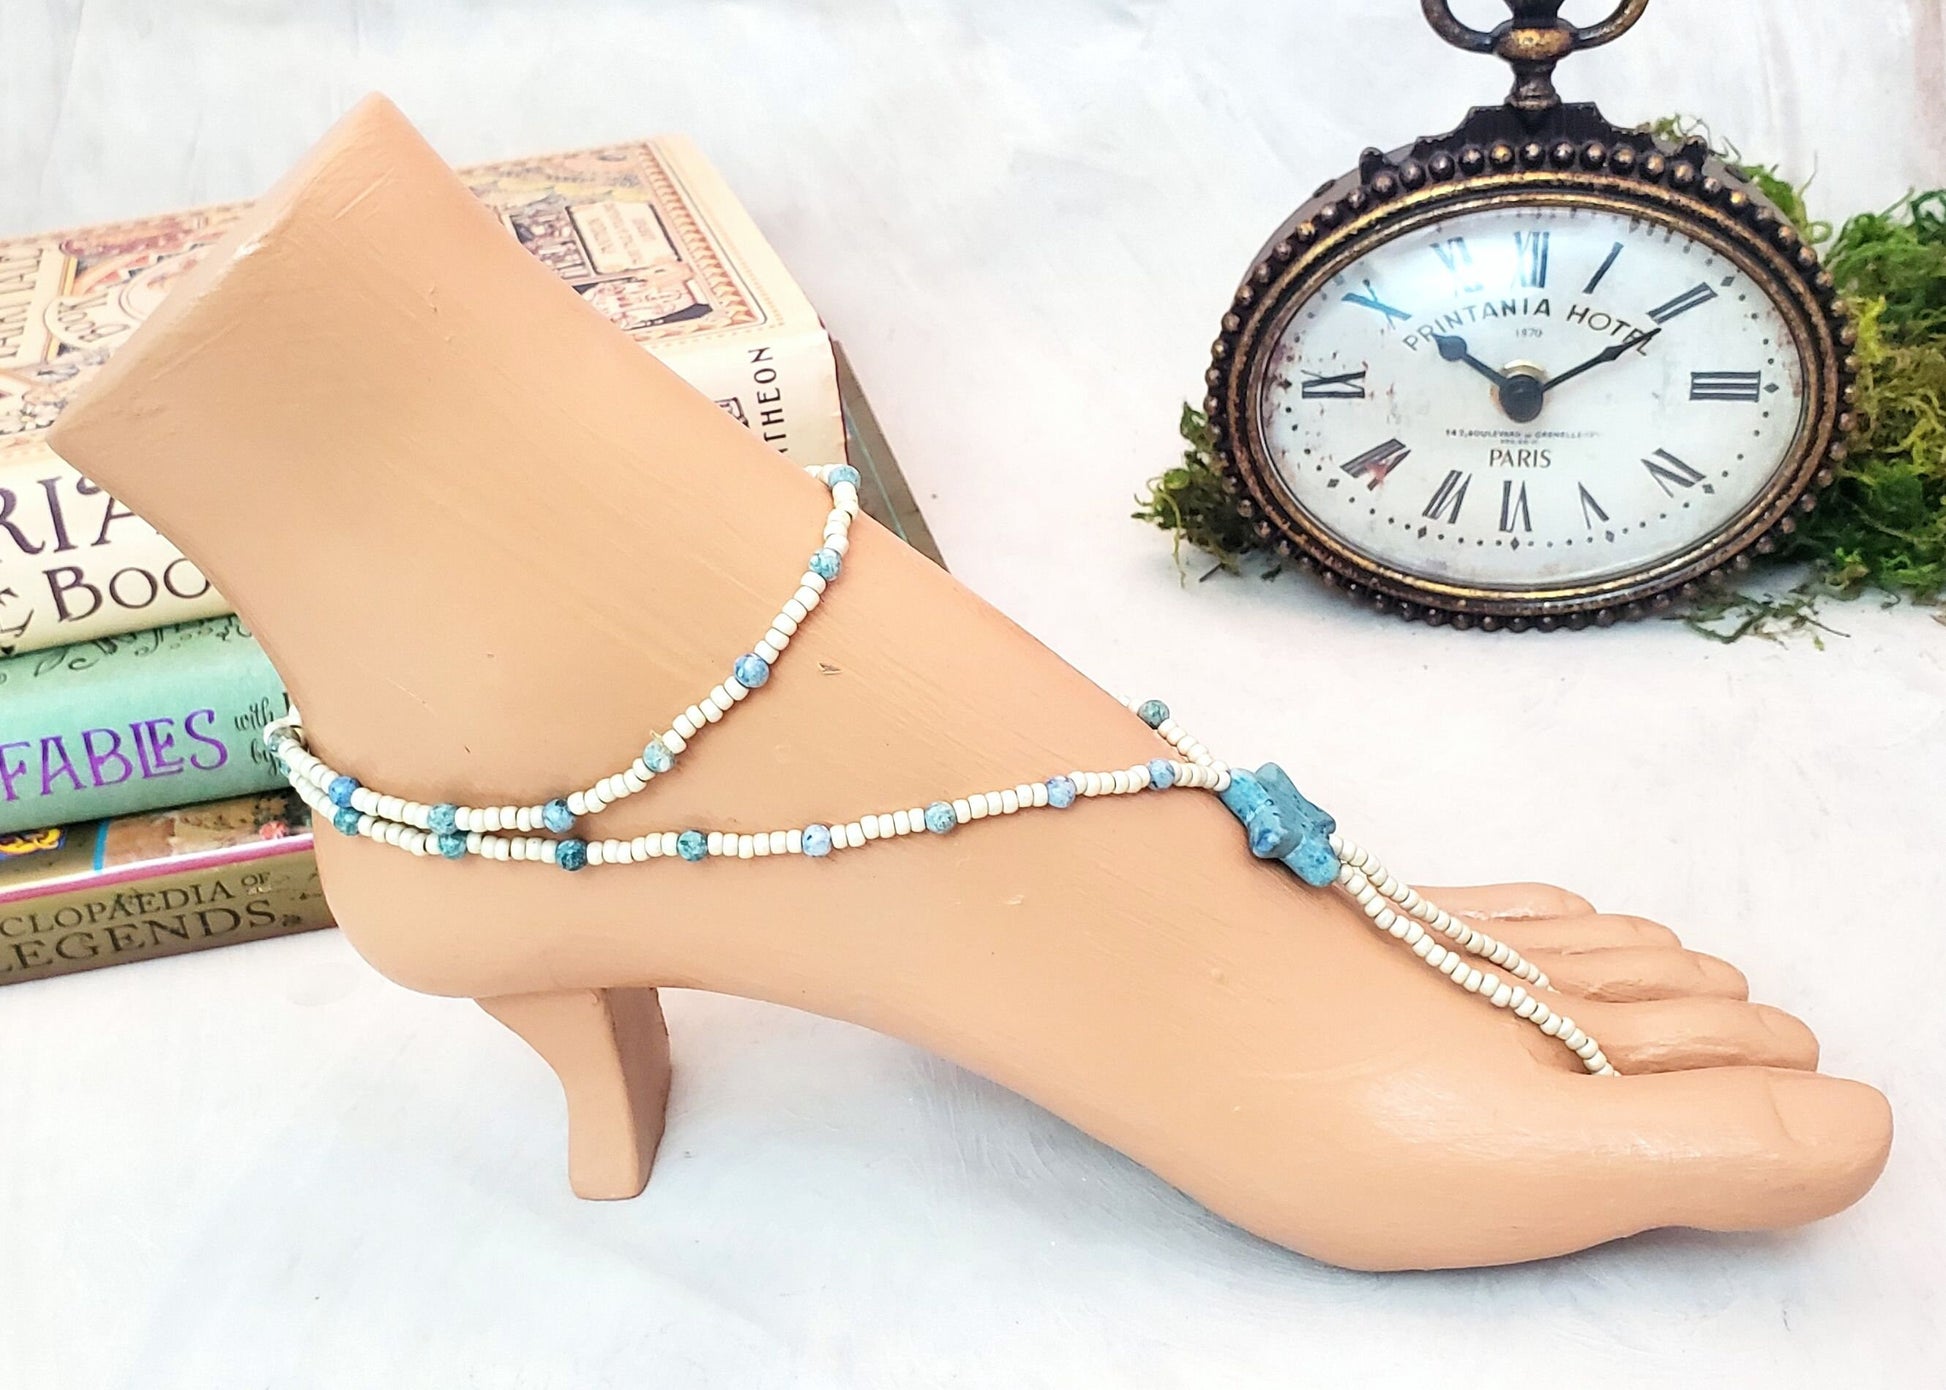 Elastic Beaded Barefoot Sandal or Hand Flower in Opaque White/Ivory + Turquoise Blue with Star, Boho, Bohemian, Gypsy, Wedding, Bridesmaid